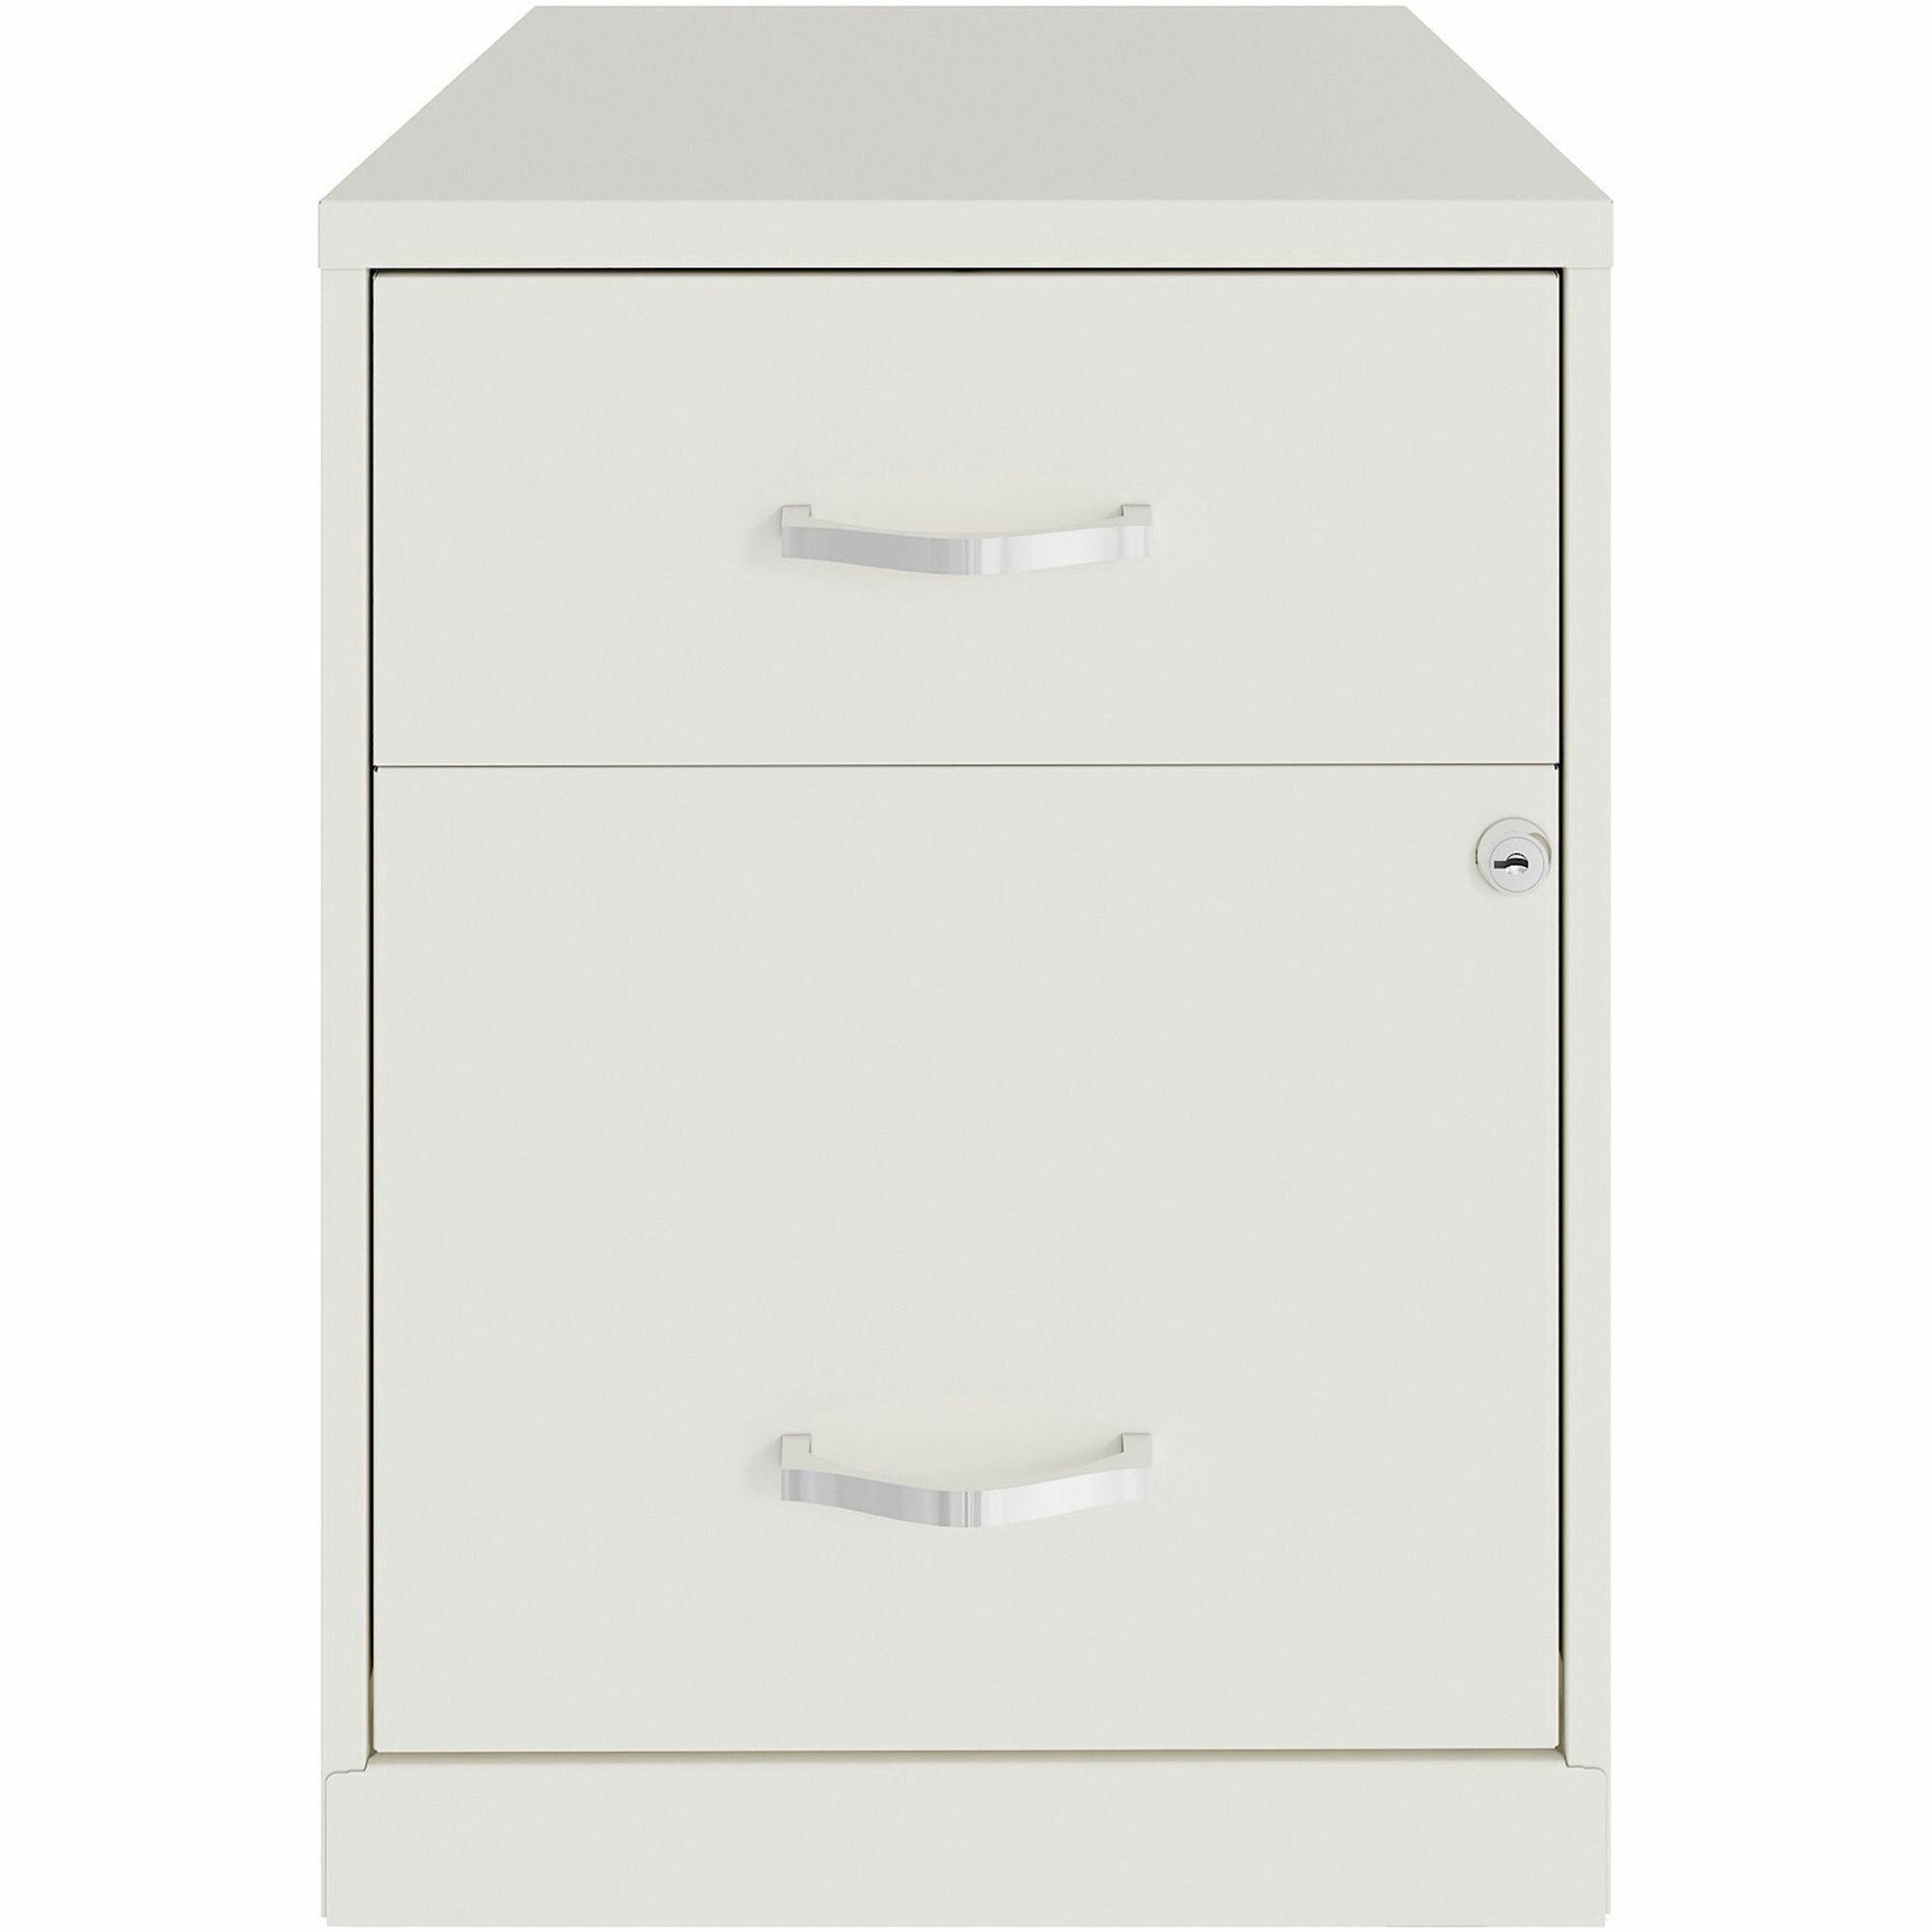 nusparc-file-cabinet-142-x-18-x-19-2-x-drawers-for-file-box-letter-vertical-locking-drawer-glide-suspension-nonporous-surface-white-baked-enamel-steel_nprvf218gawe - 2